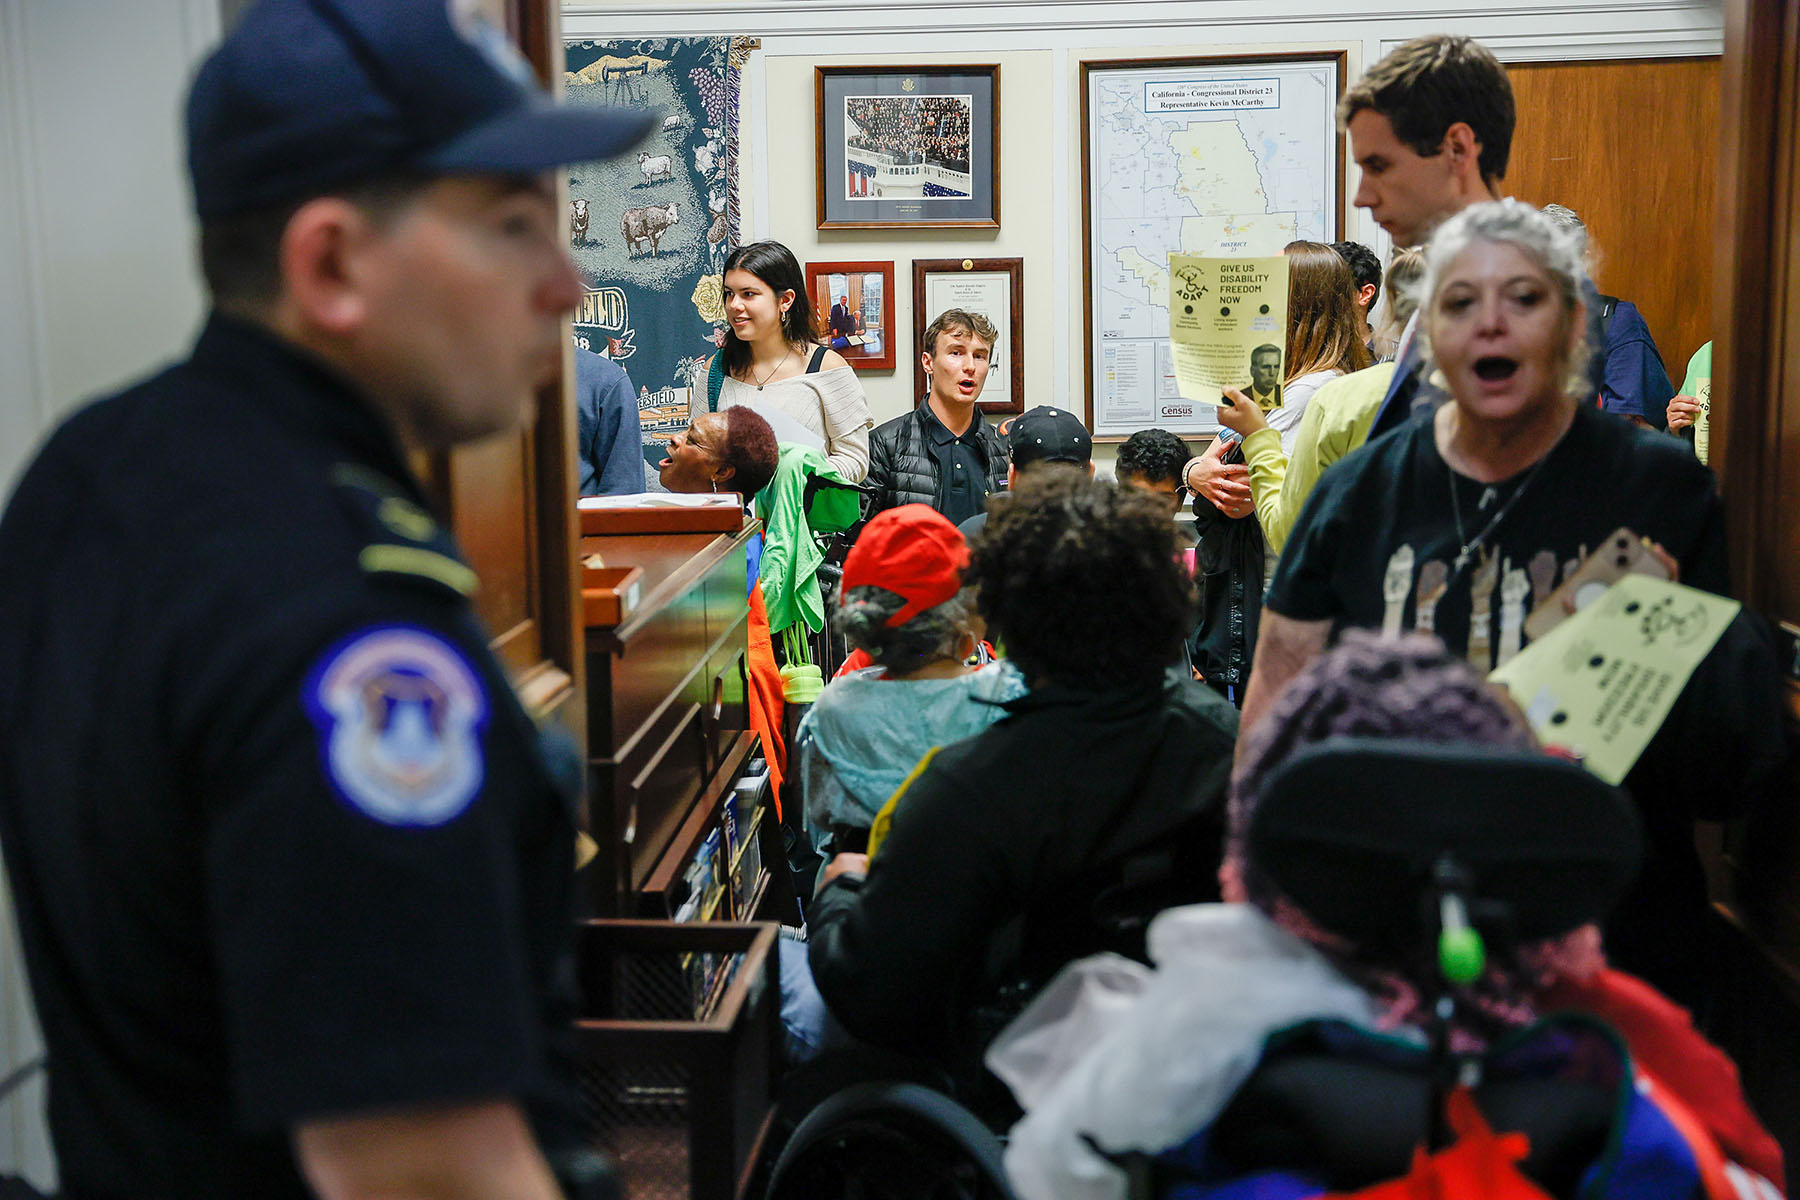 Capitol Police arrive at Speaker McCarthy's office to clear out protesters during a sit in staged by activists from ADAPT on Capitol Hill.